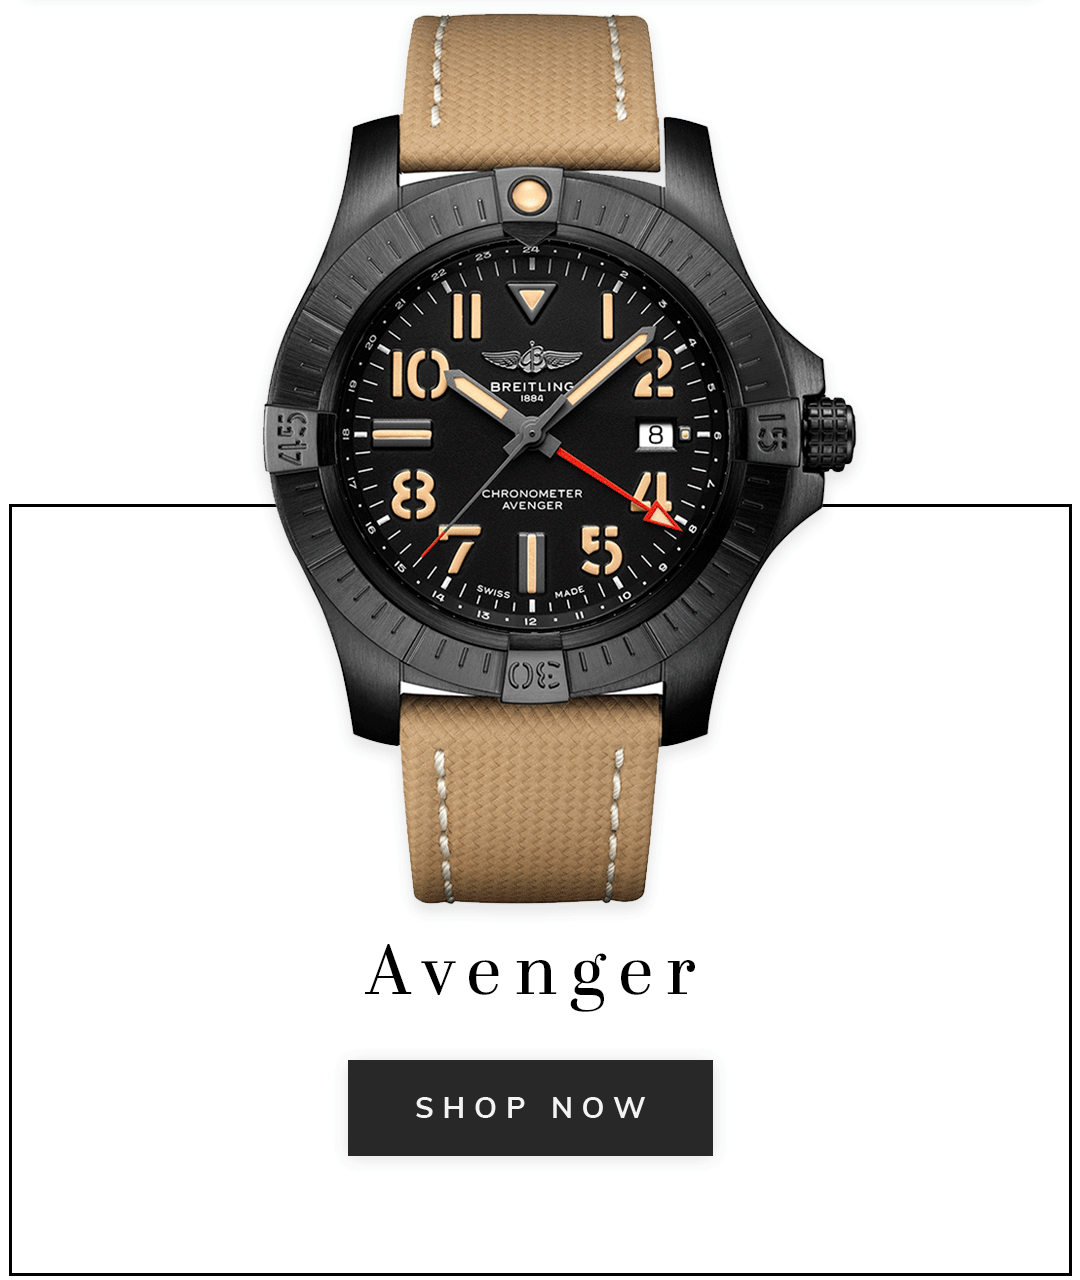 A Breitling Avenger watch with text shop now